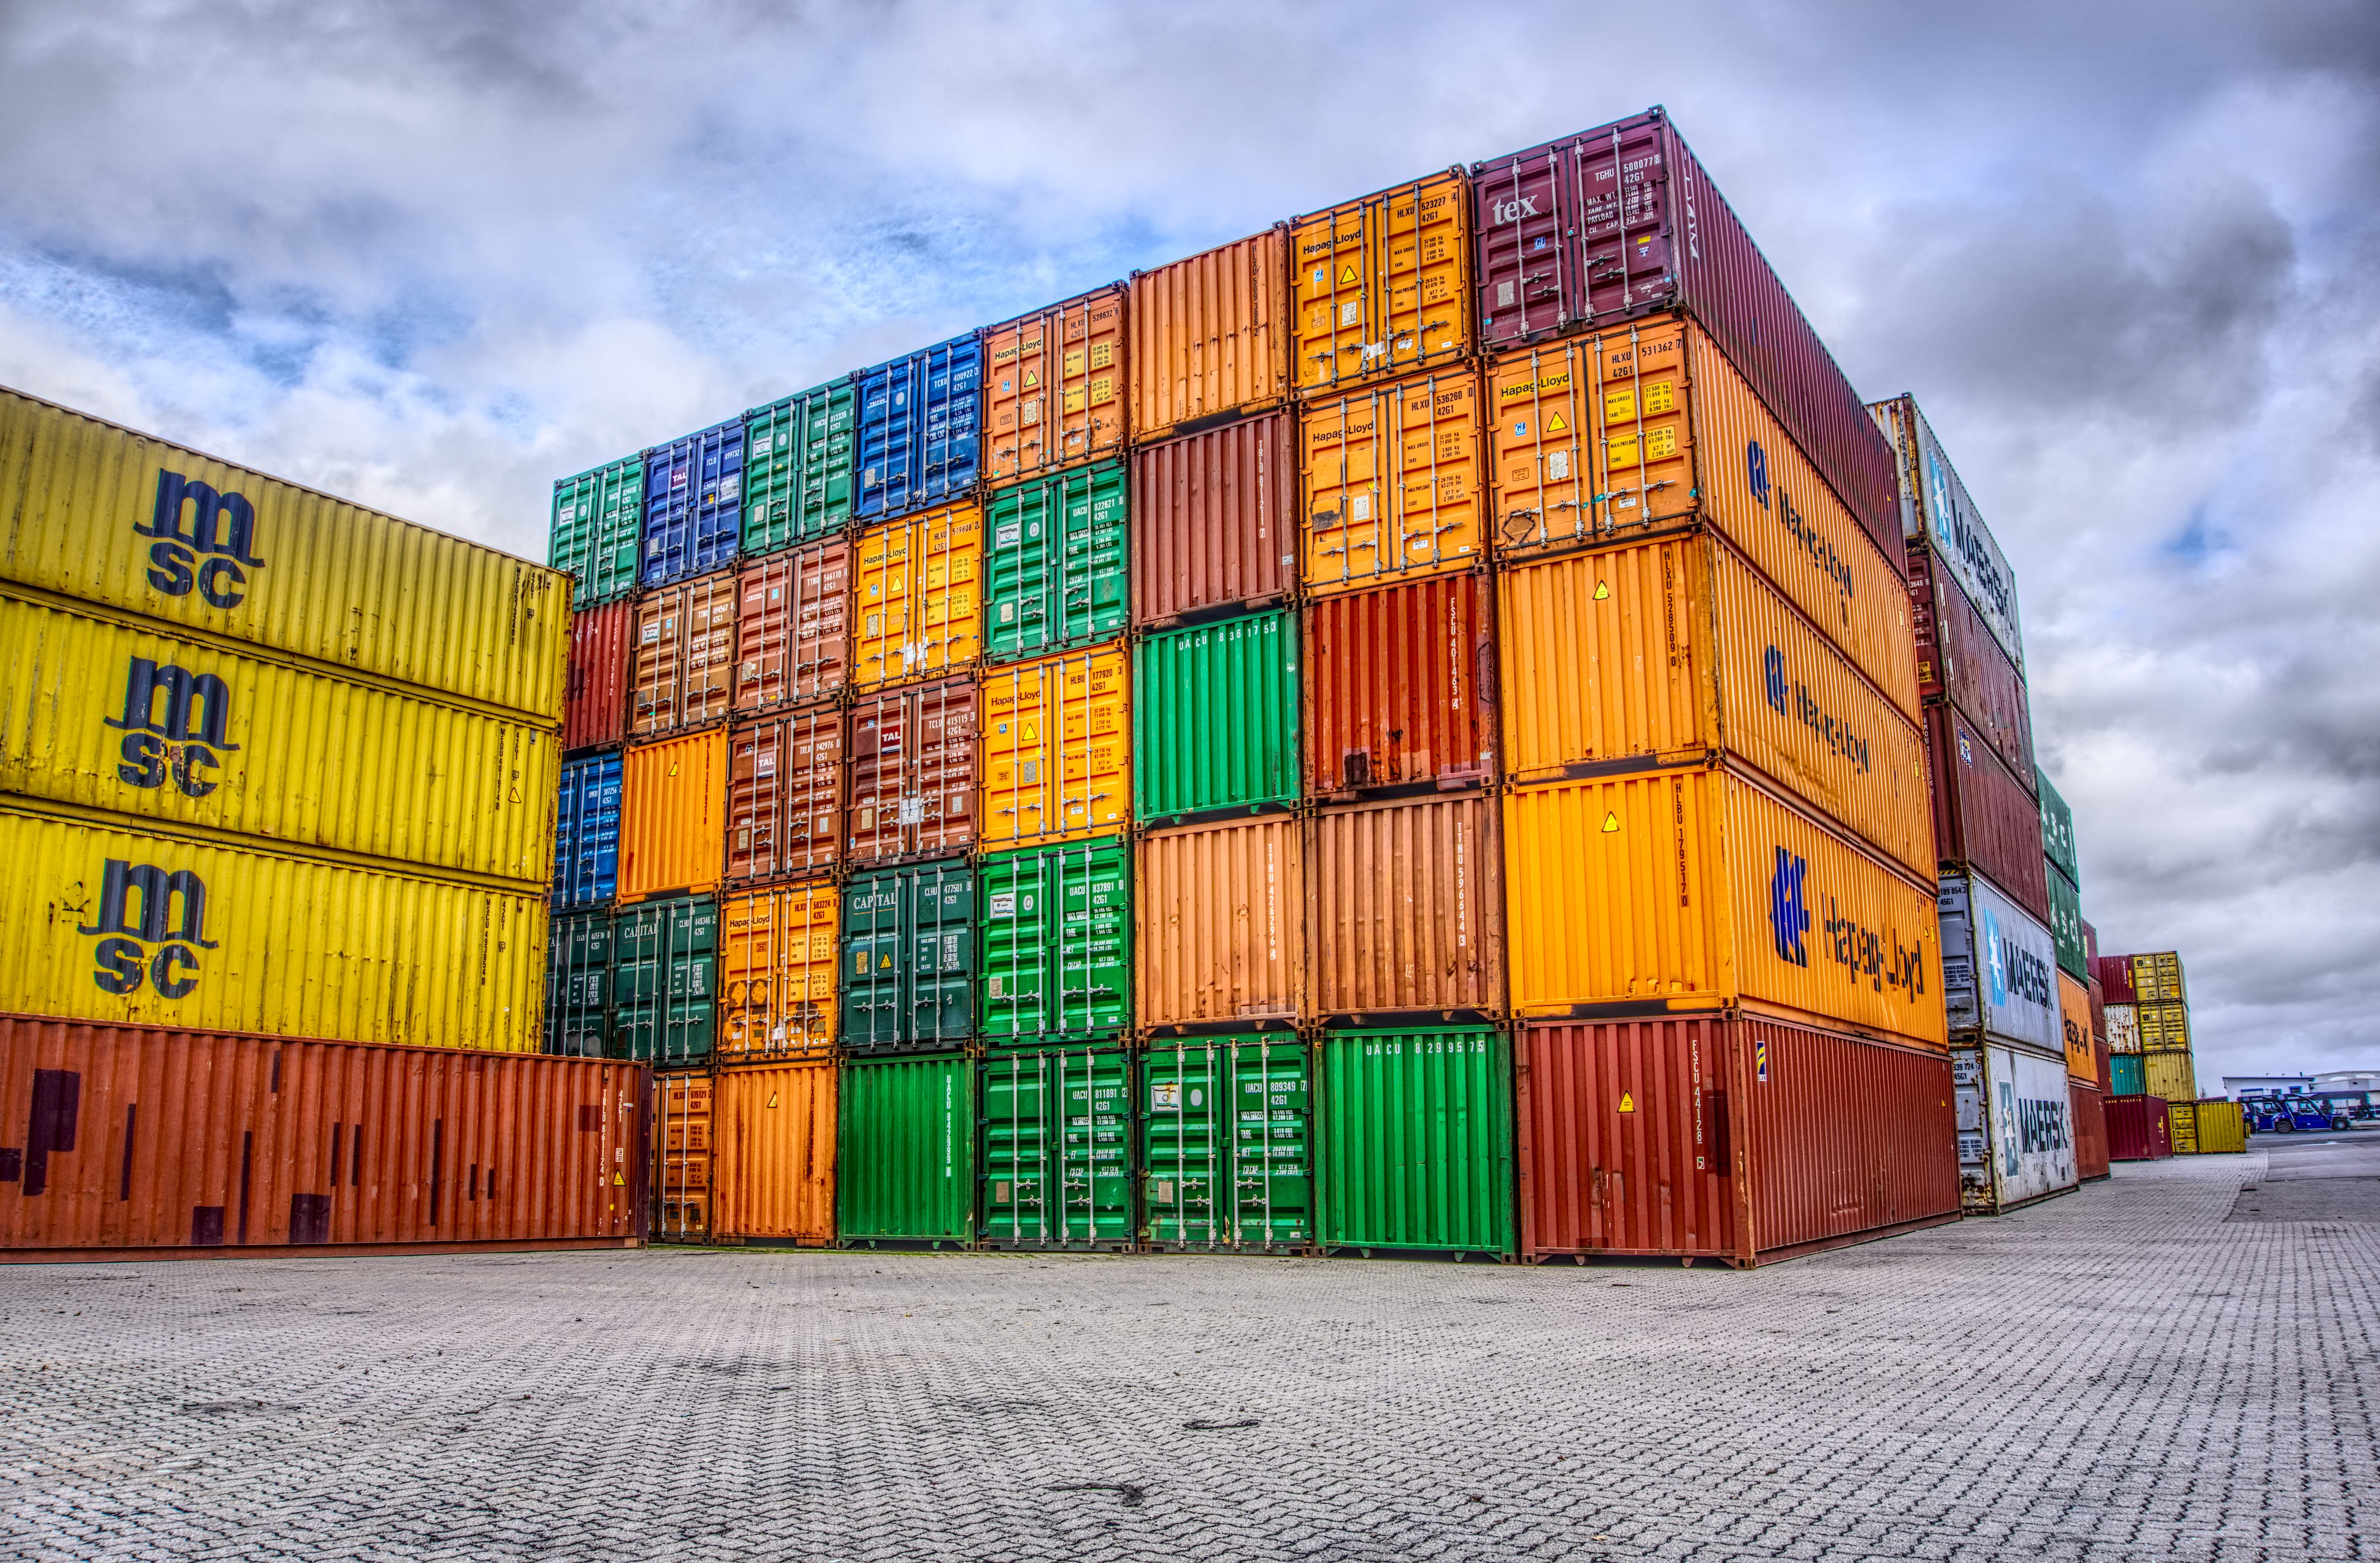 Global Scramble Containers has Led to Increasing Demand of PU